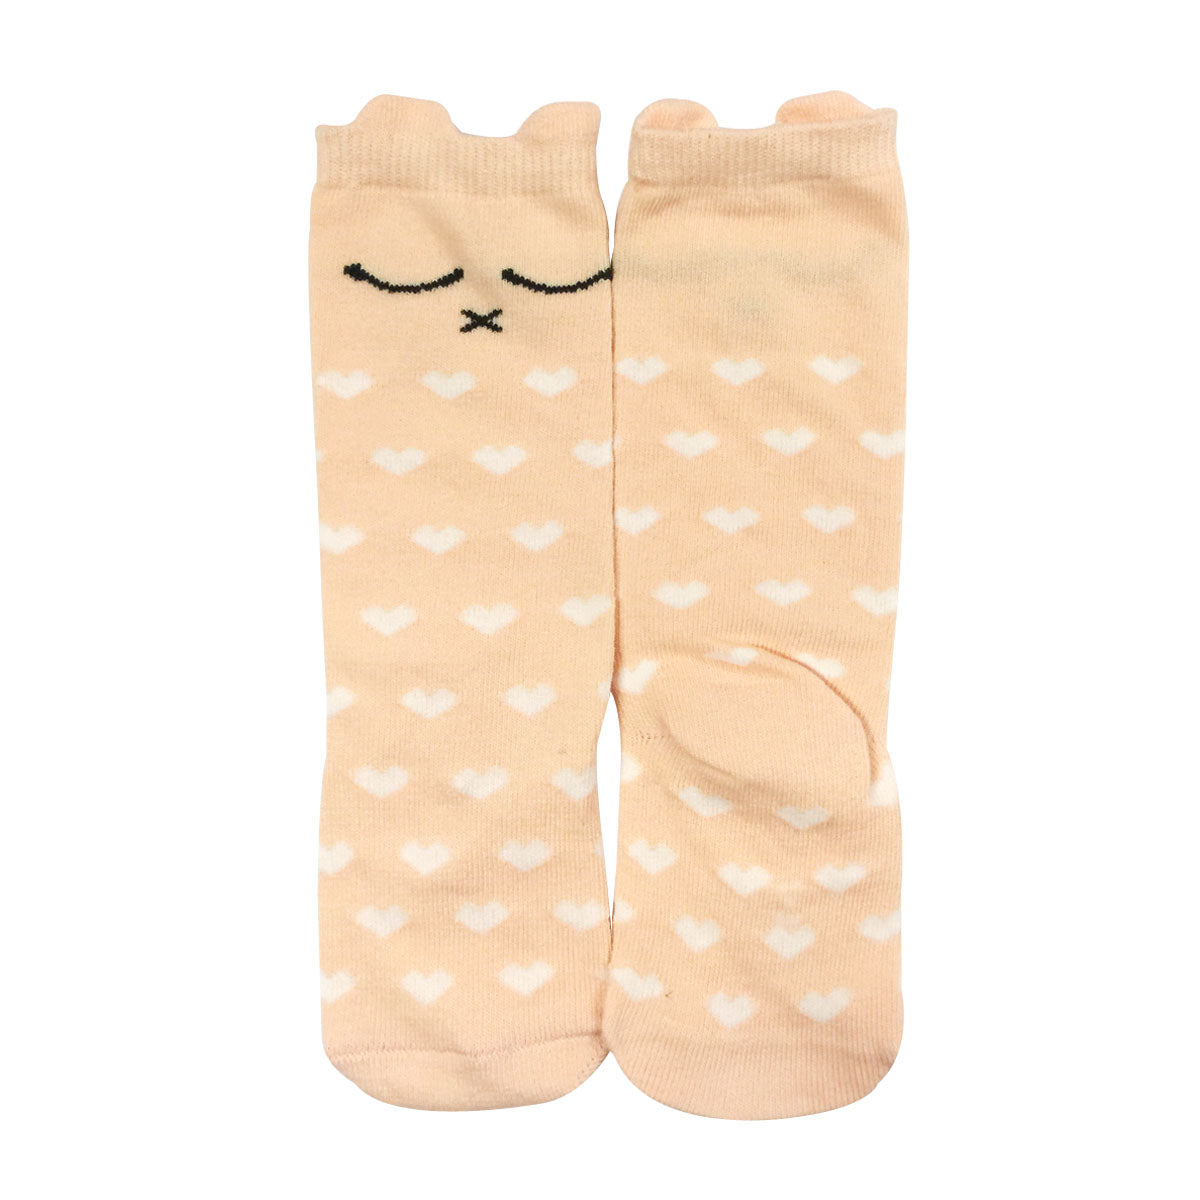 Wrapables My Best Buddy Socks for Baby (Set of 6), Pastel Pals